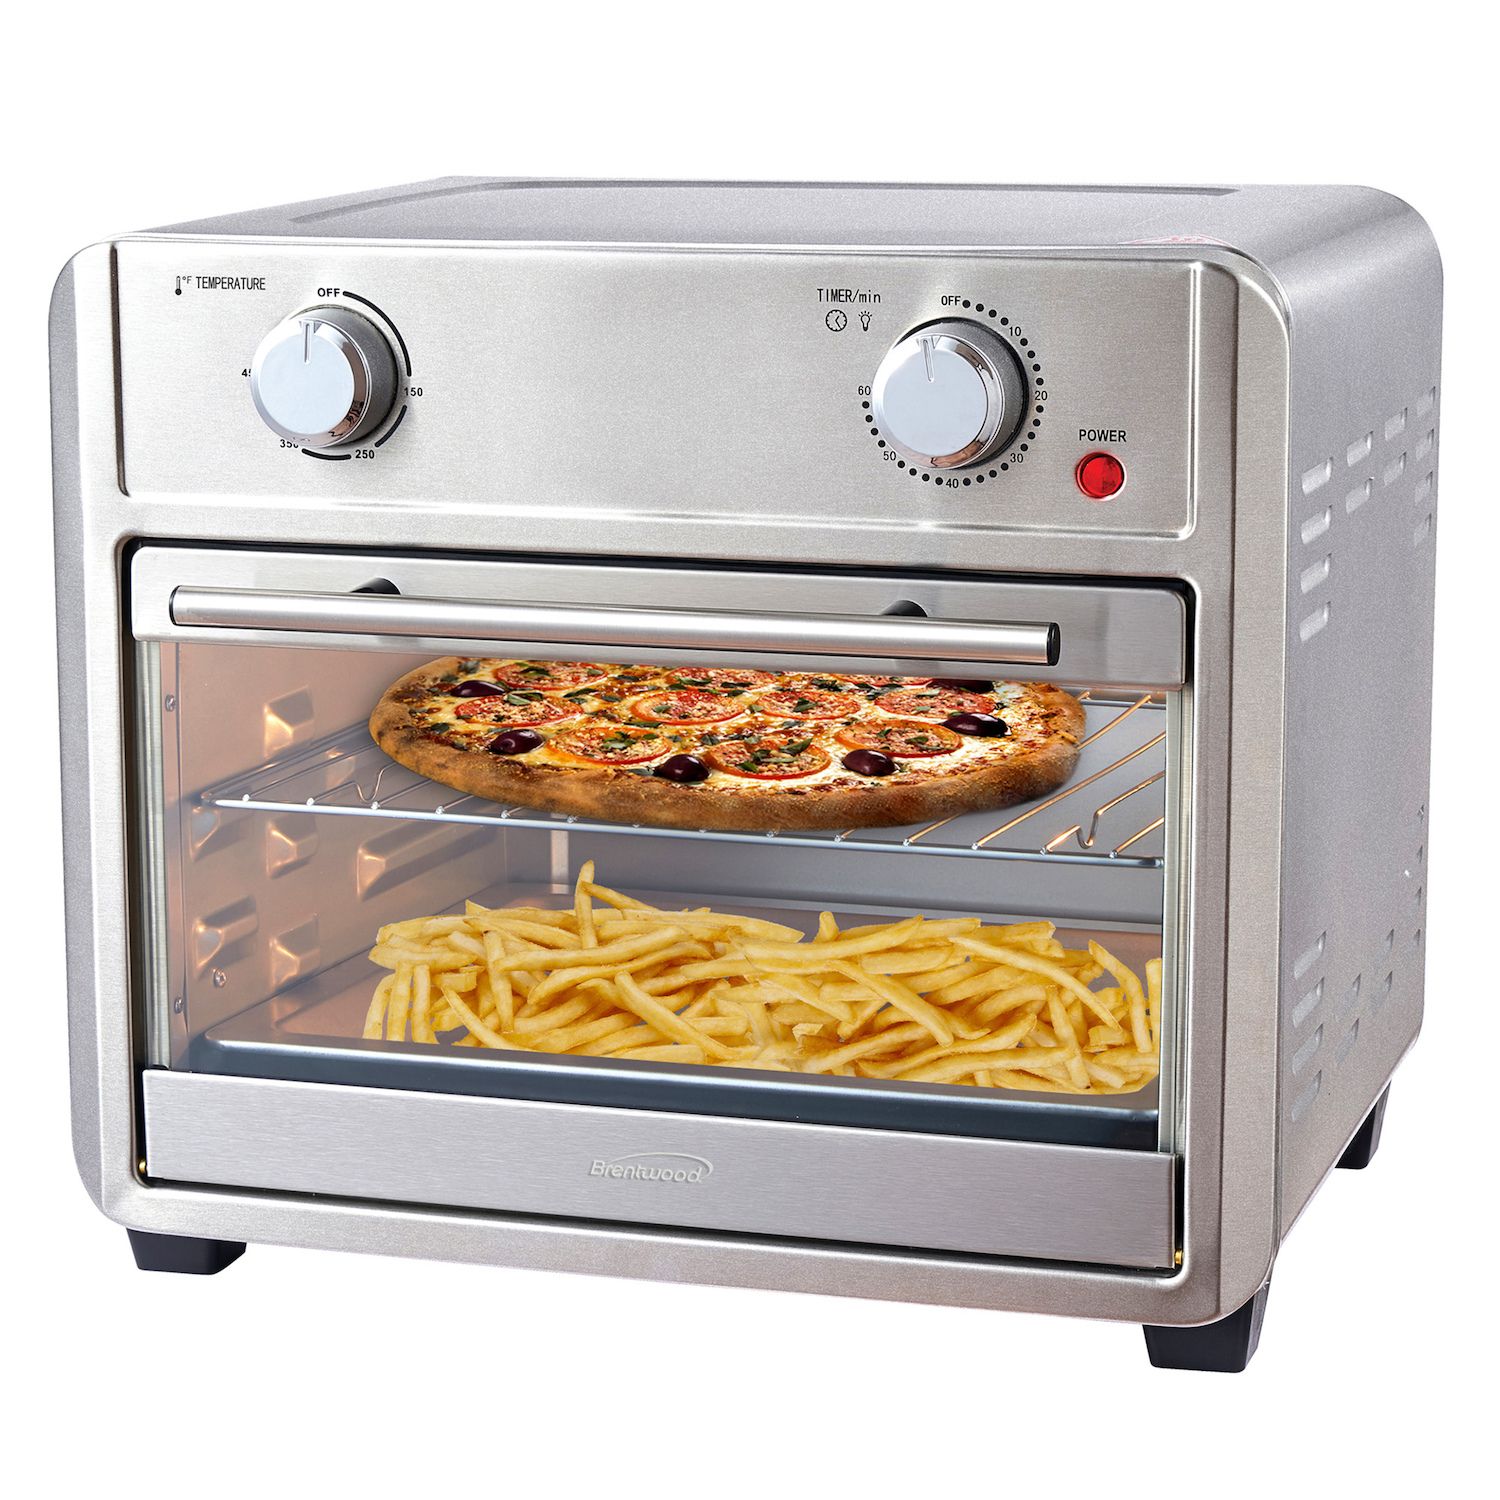 WHALL Toaster Oven Air Fryer, XL Large 30-Quart Smart Oven,11-in-1 Toaster  Oven Countertop with Steam Function,12-inch Pizza,Stainless Steel /1700W/R